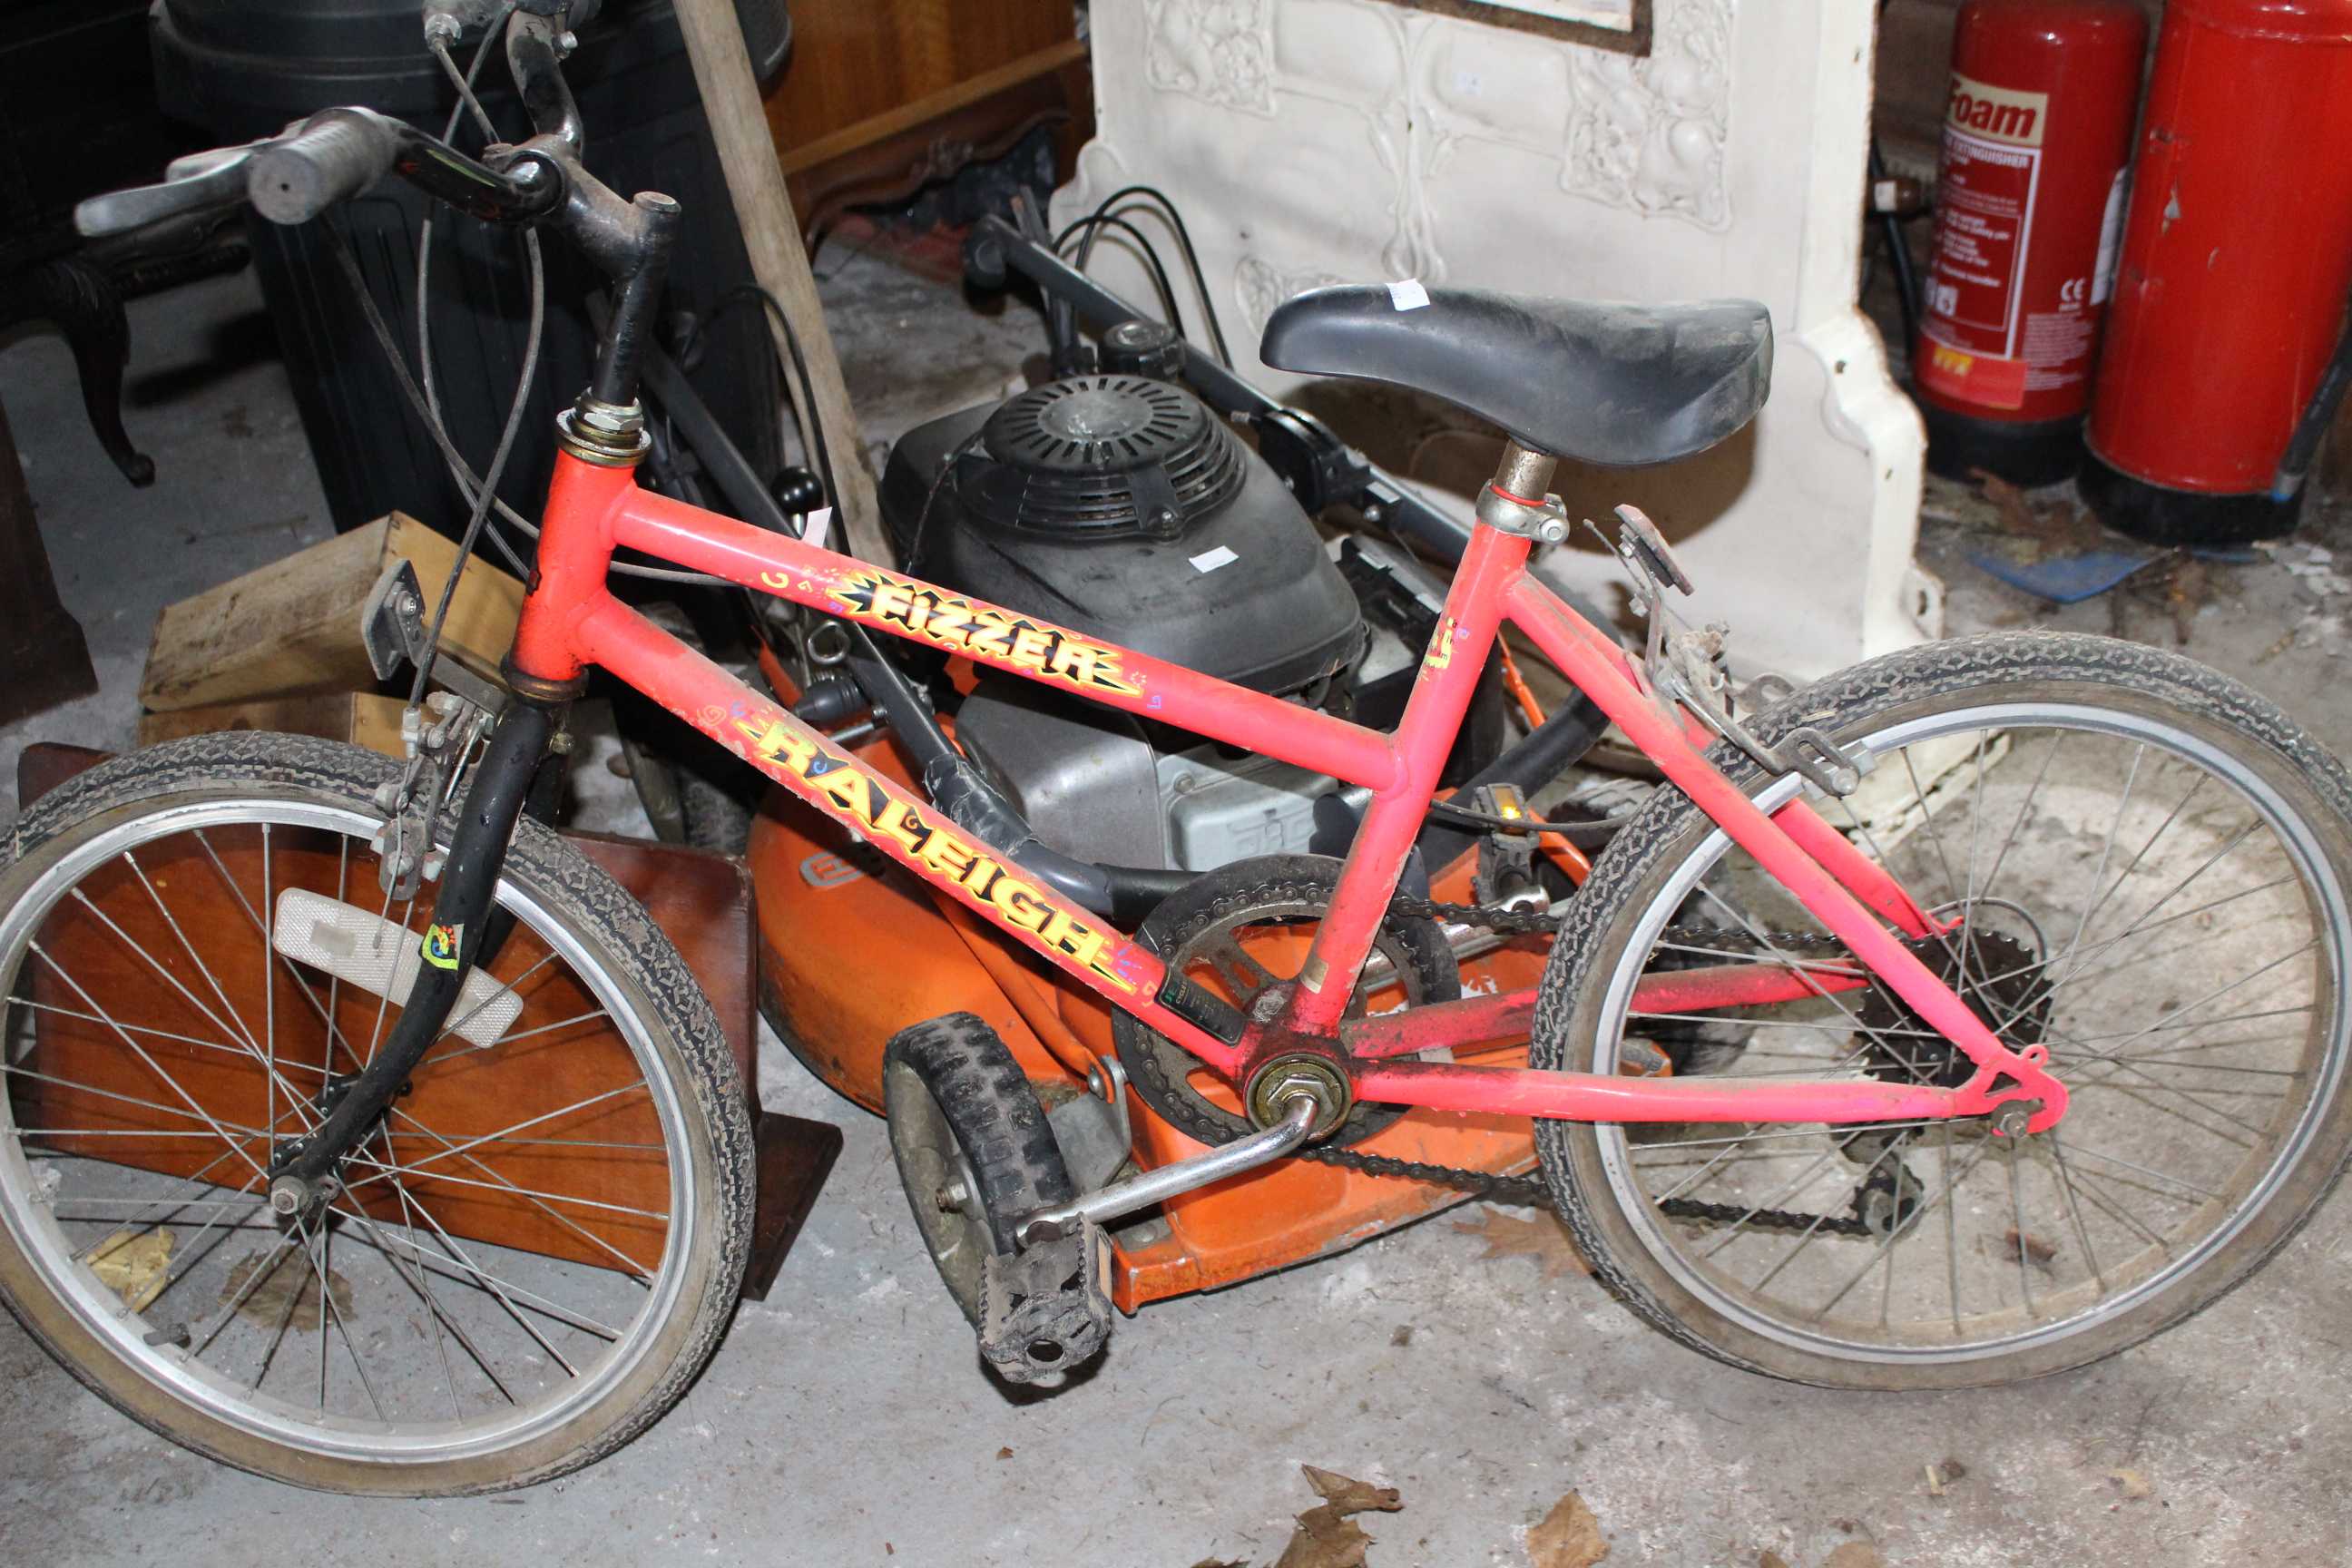 3 x Vintage Childrens pushbikes and 1 x Childrens scooter, to include 1 x Raleigh Budgie and 1 x - Image 4 of 5